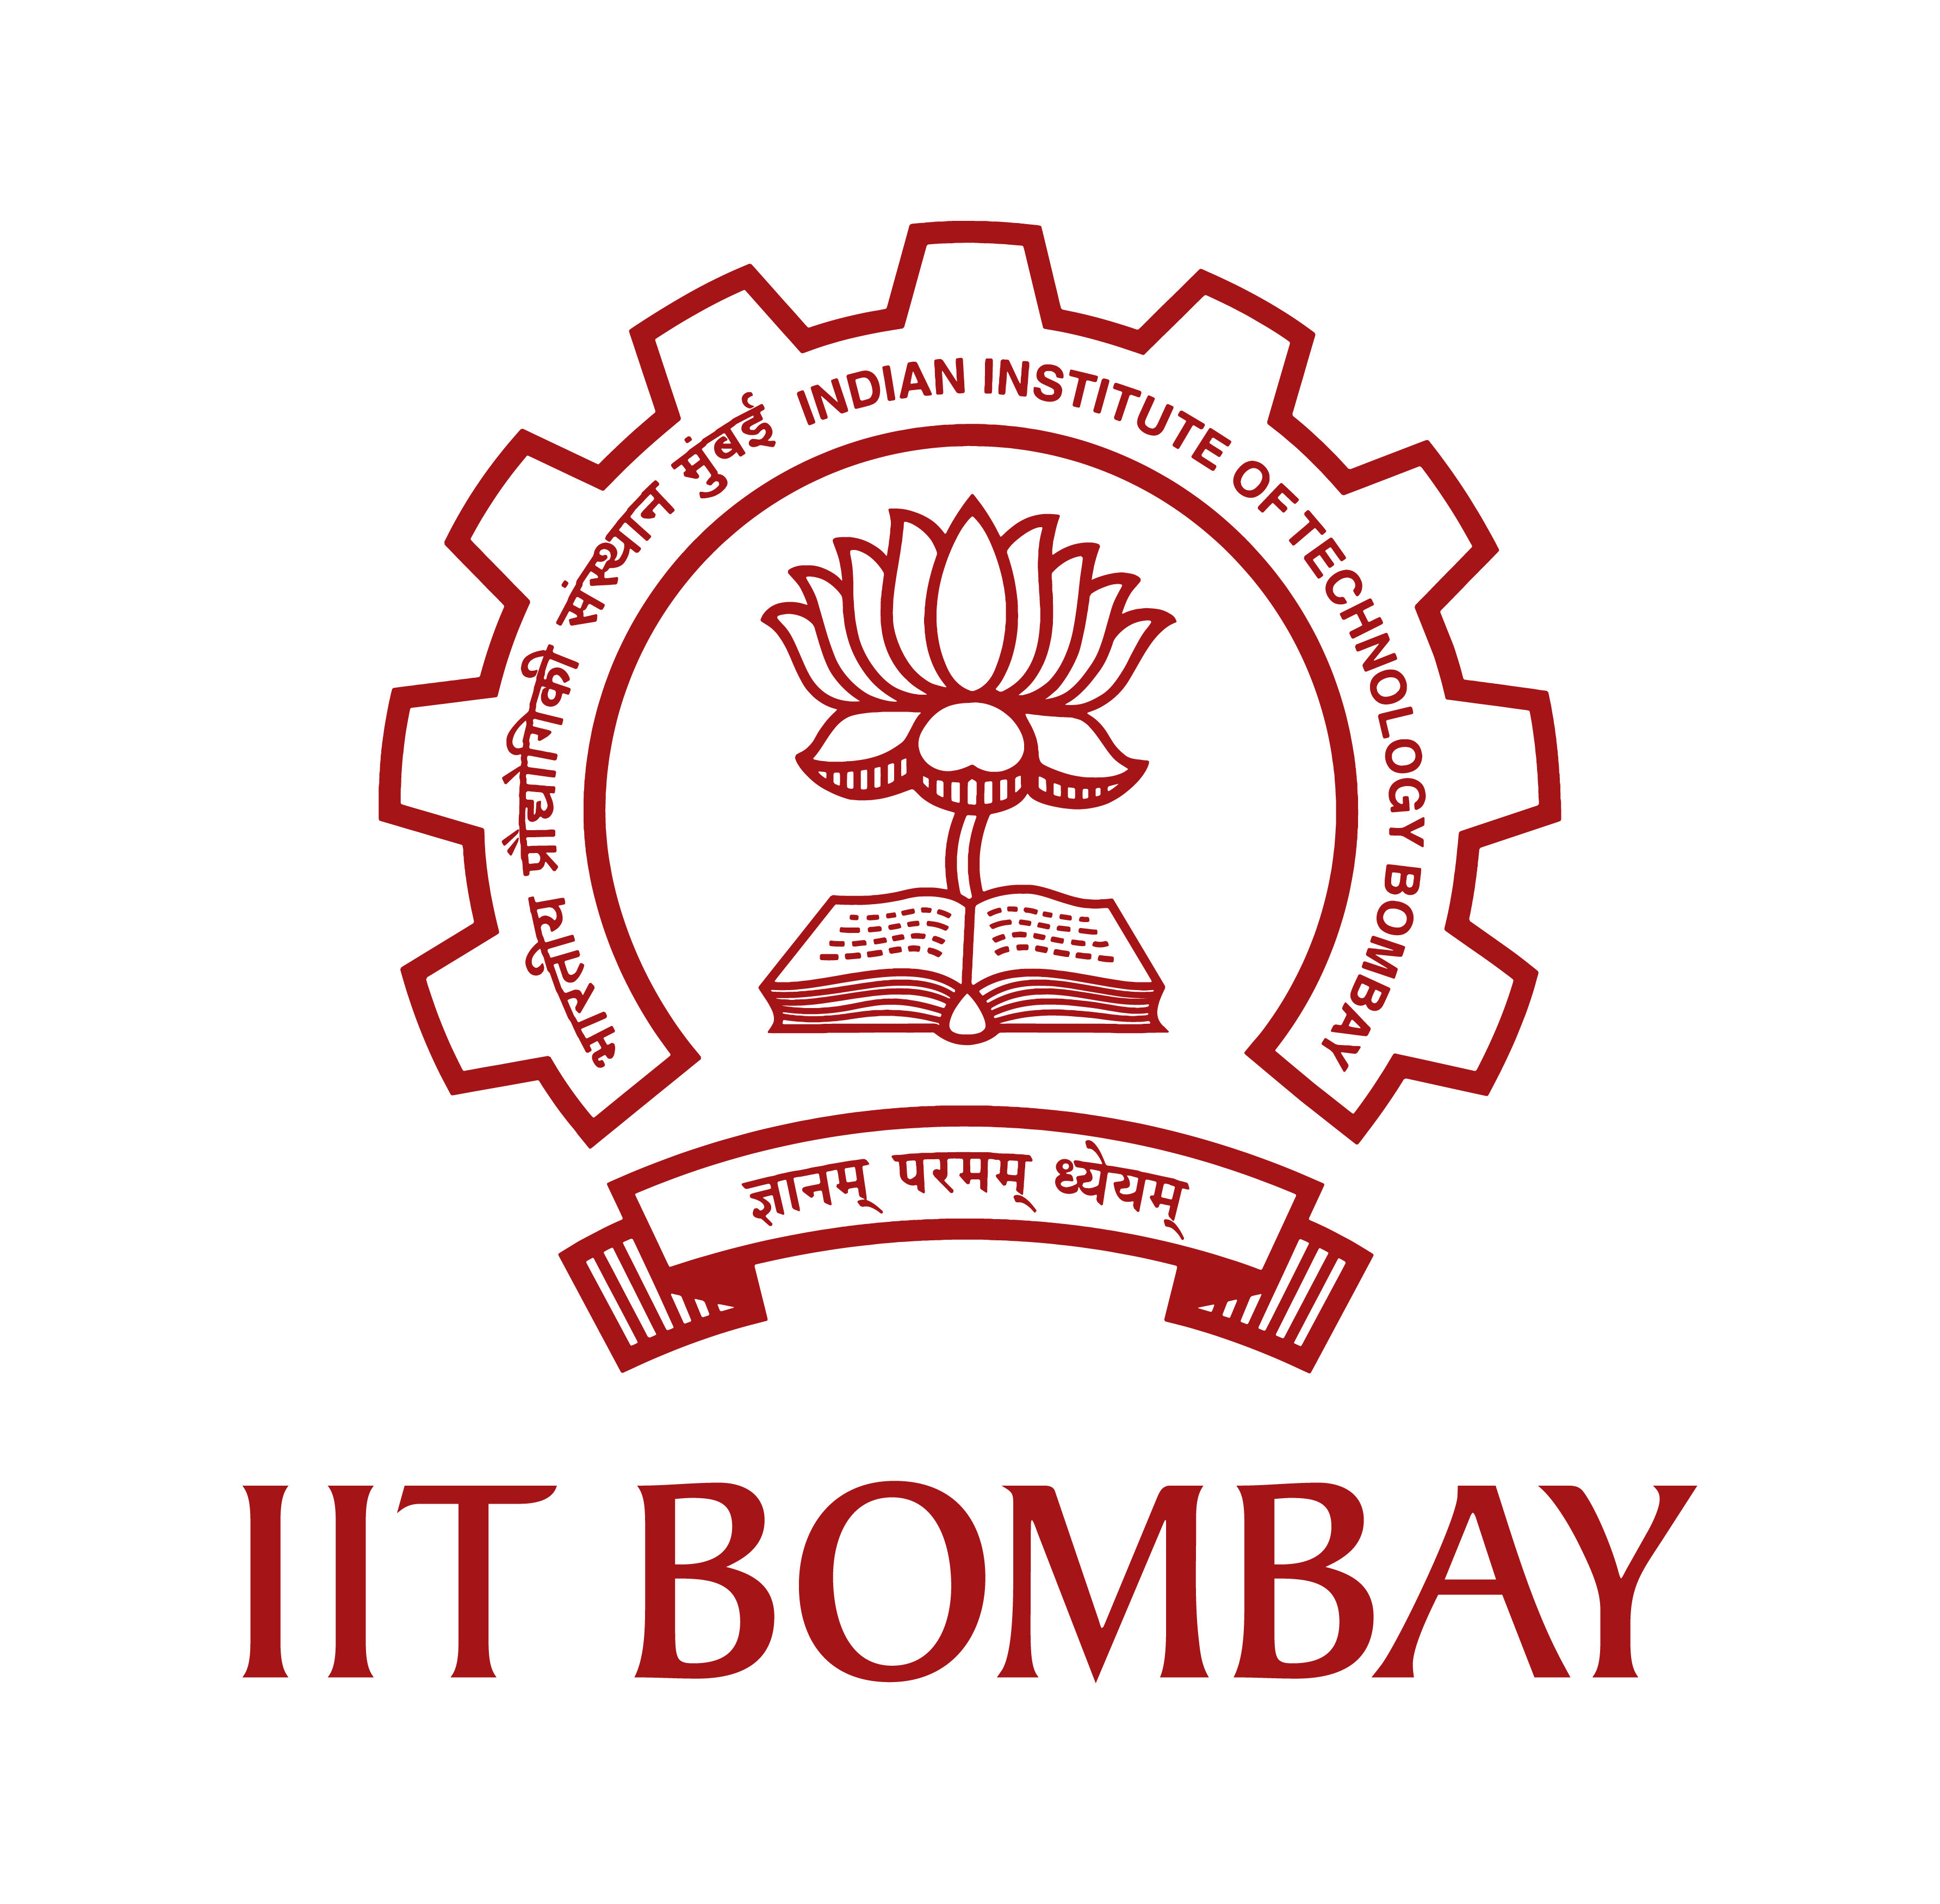 Director's Page  Indian Institute of Technology Bombay